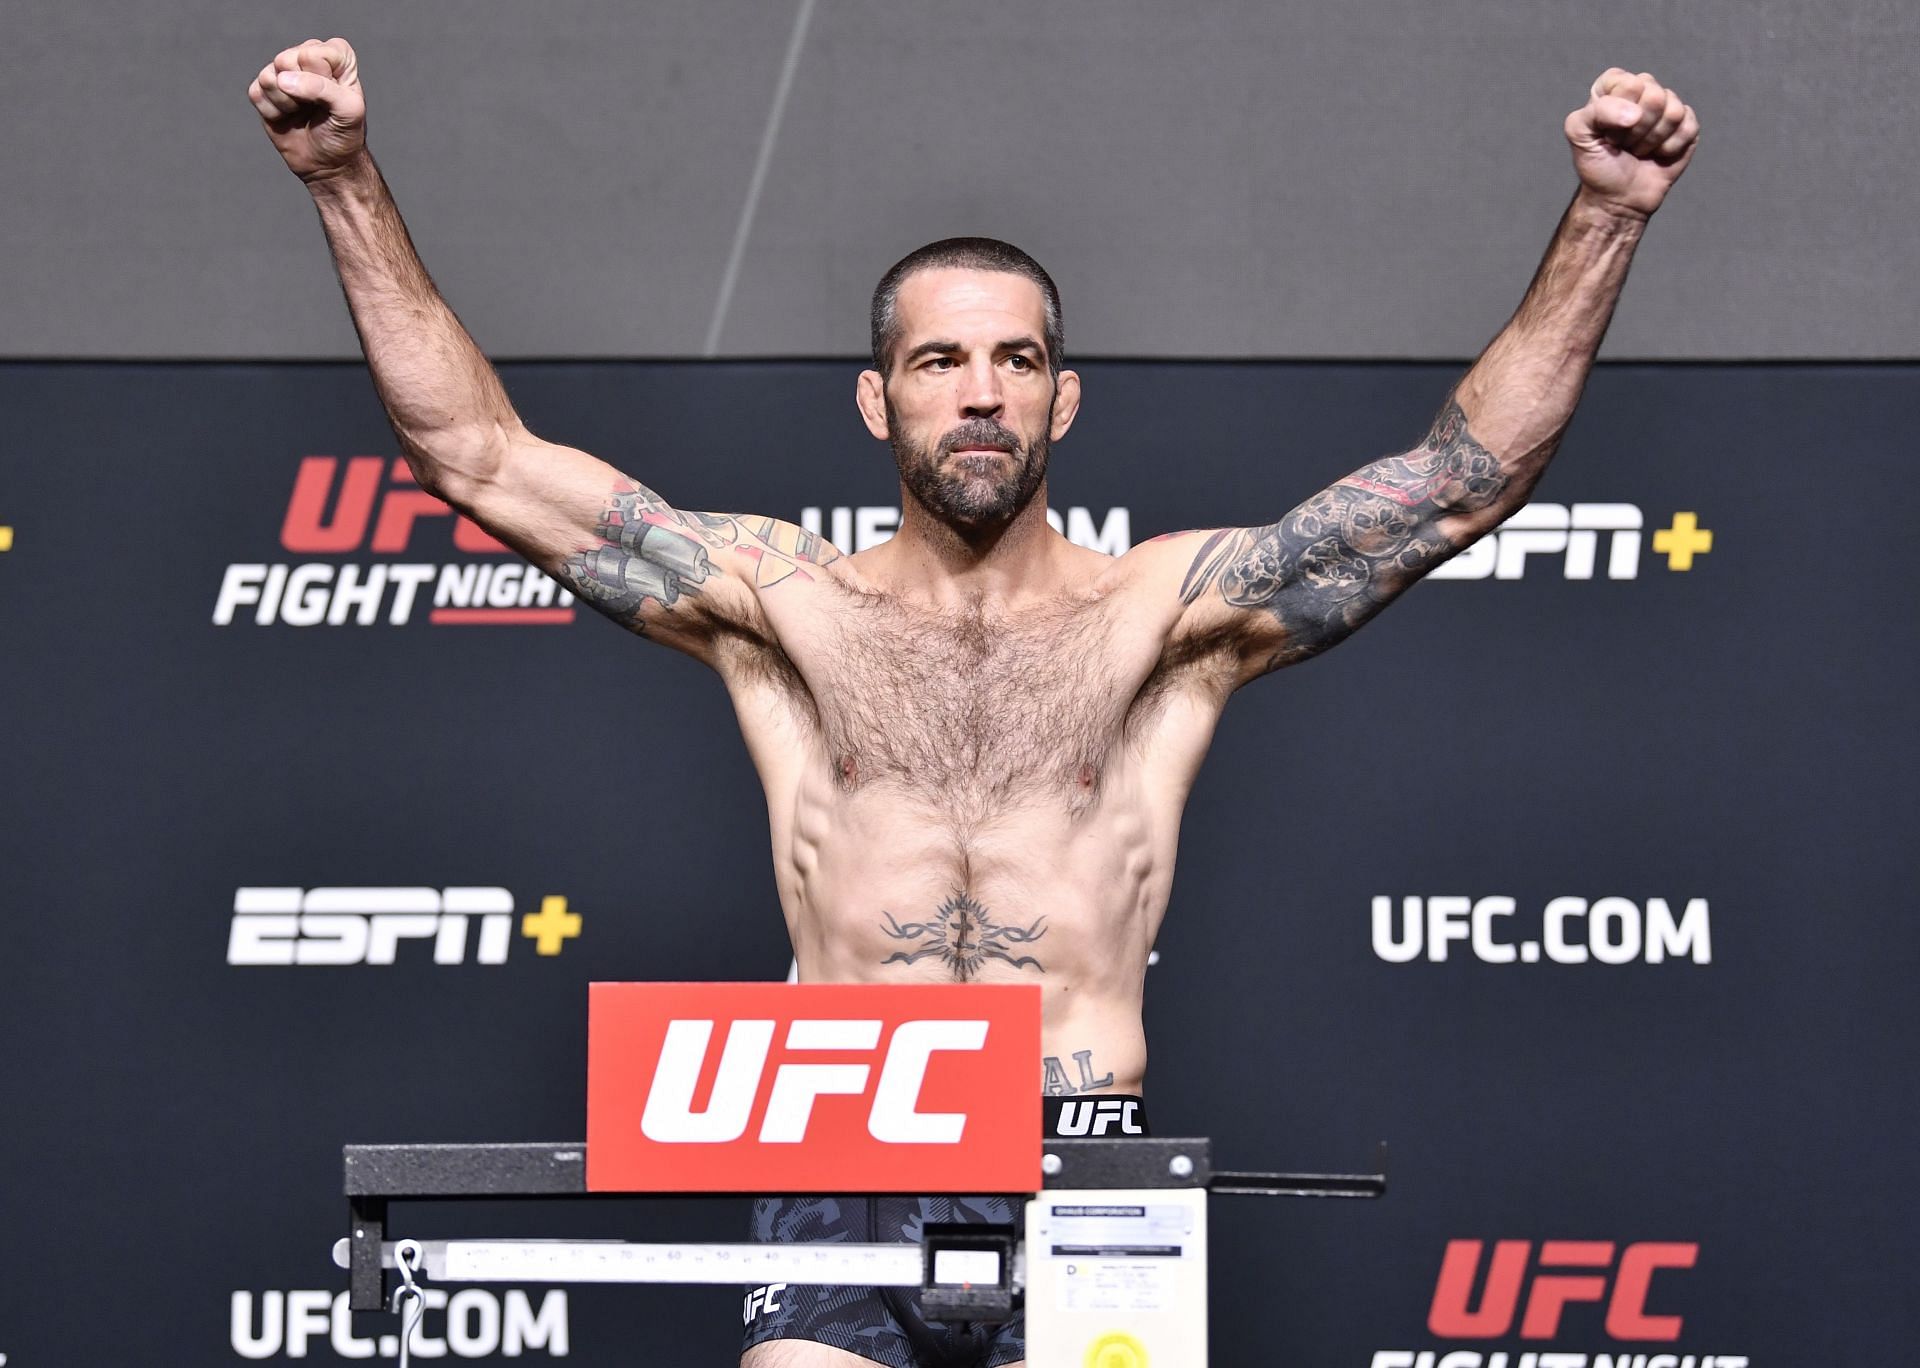 Matt Brown Weighing in and set to compete